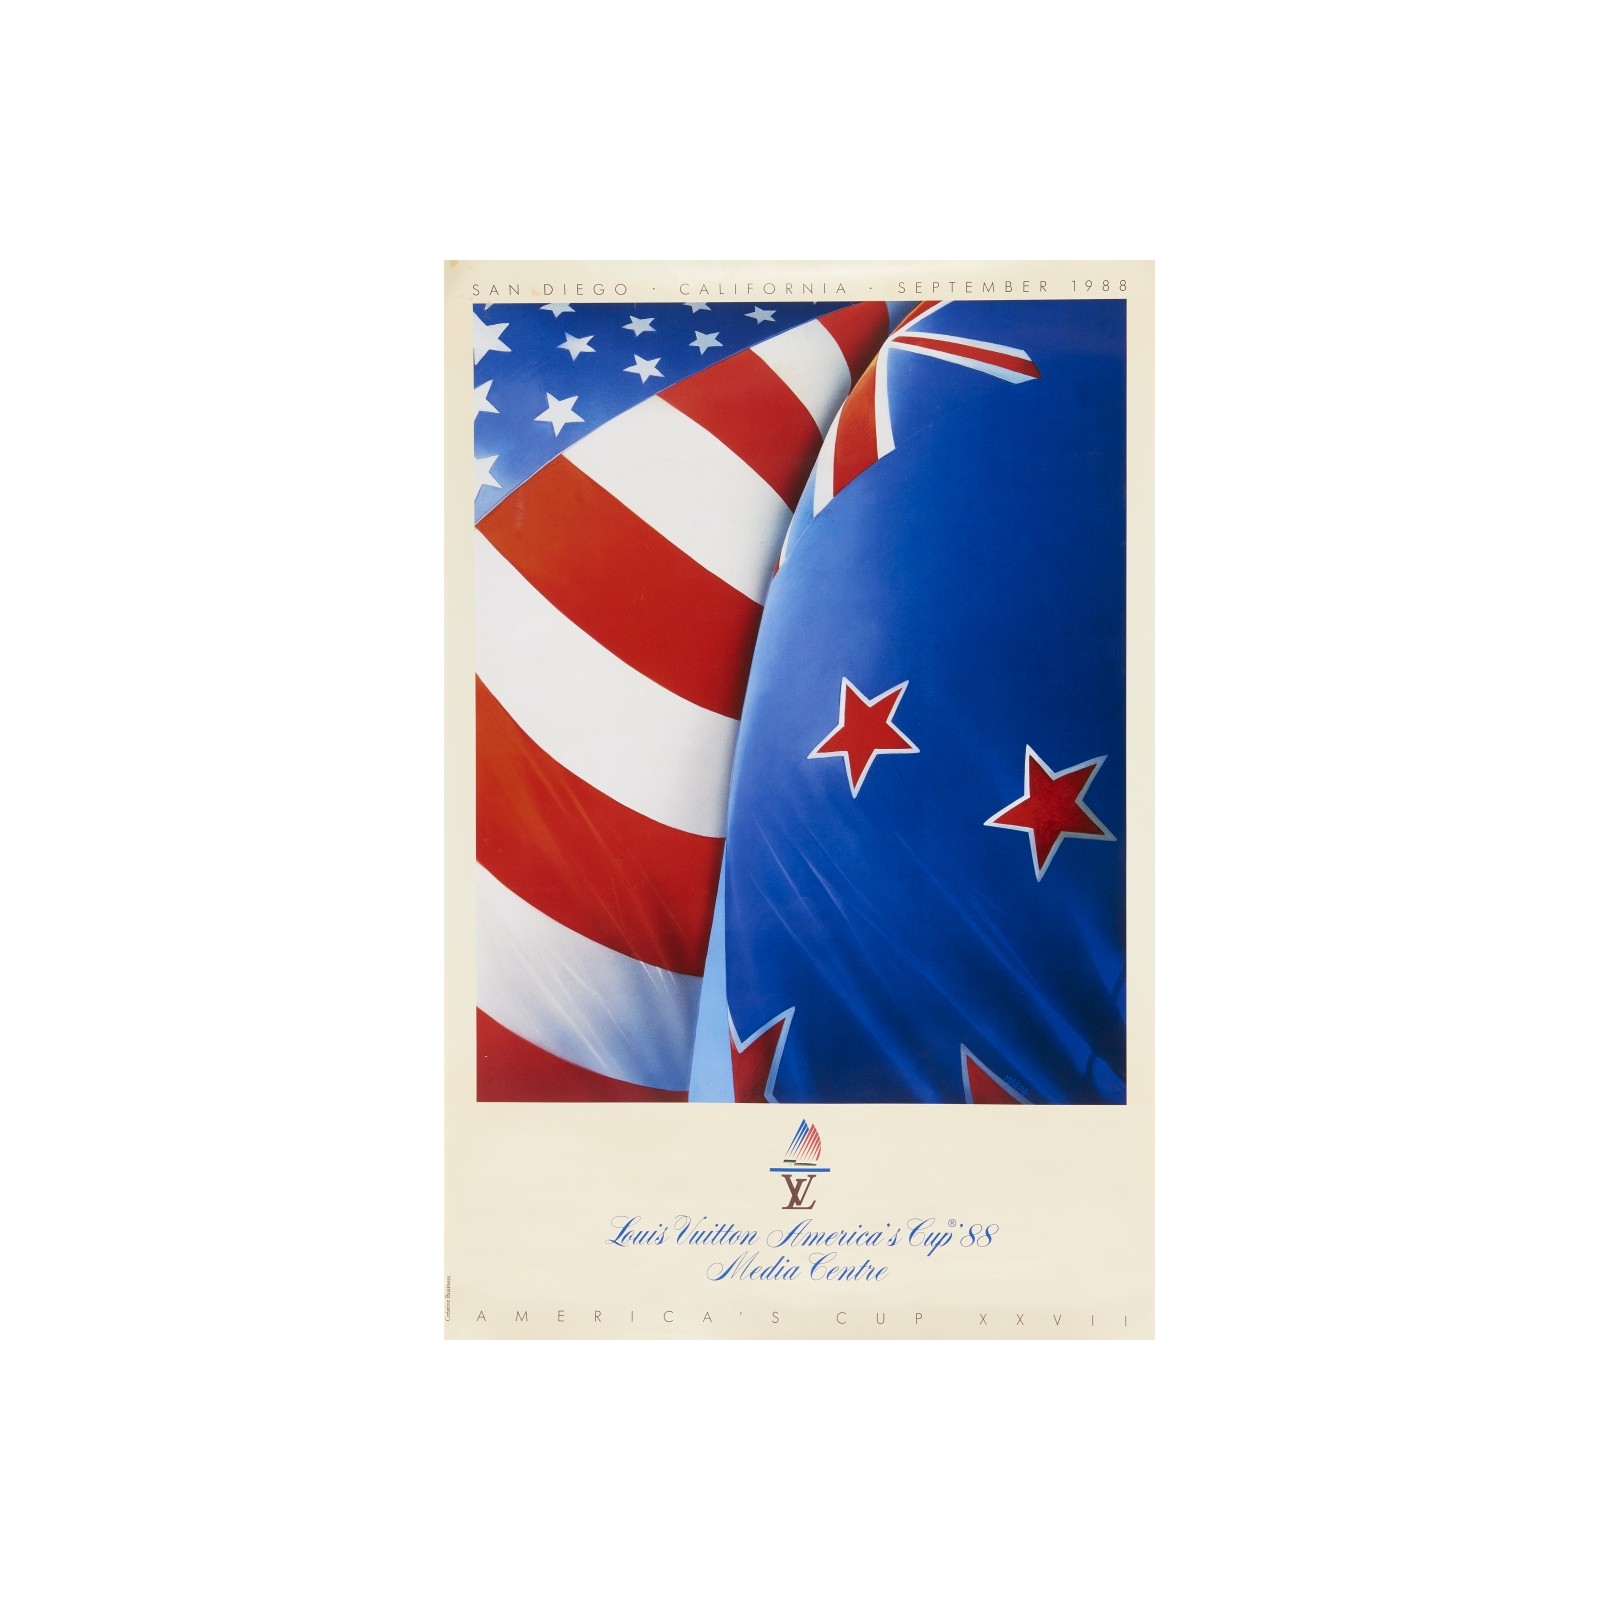 Louis Vuitton Americas Cup Poster - 2 For Sale on 1stDibs